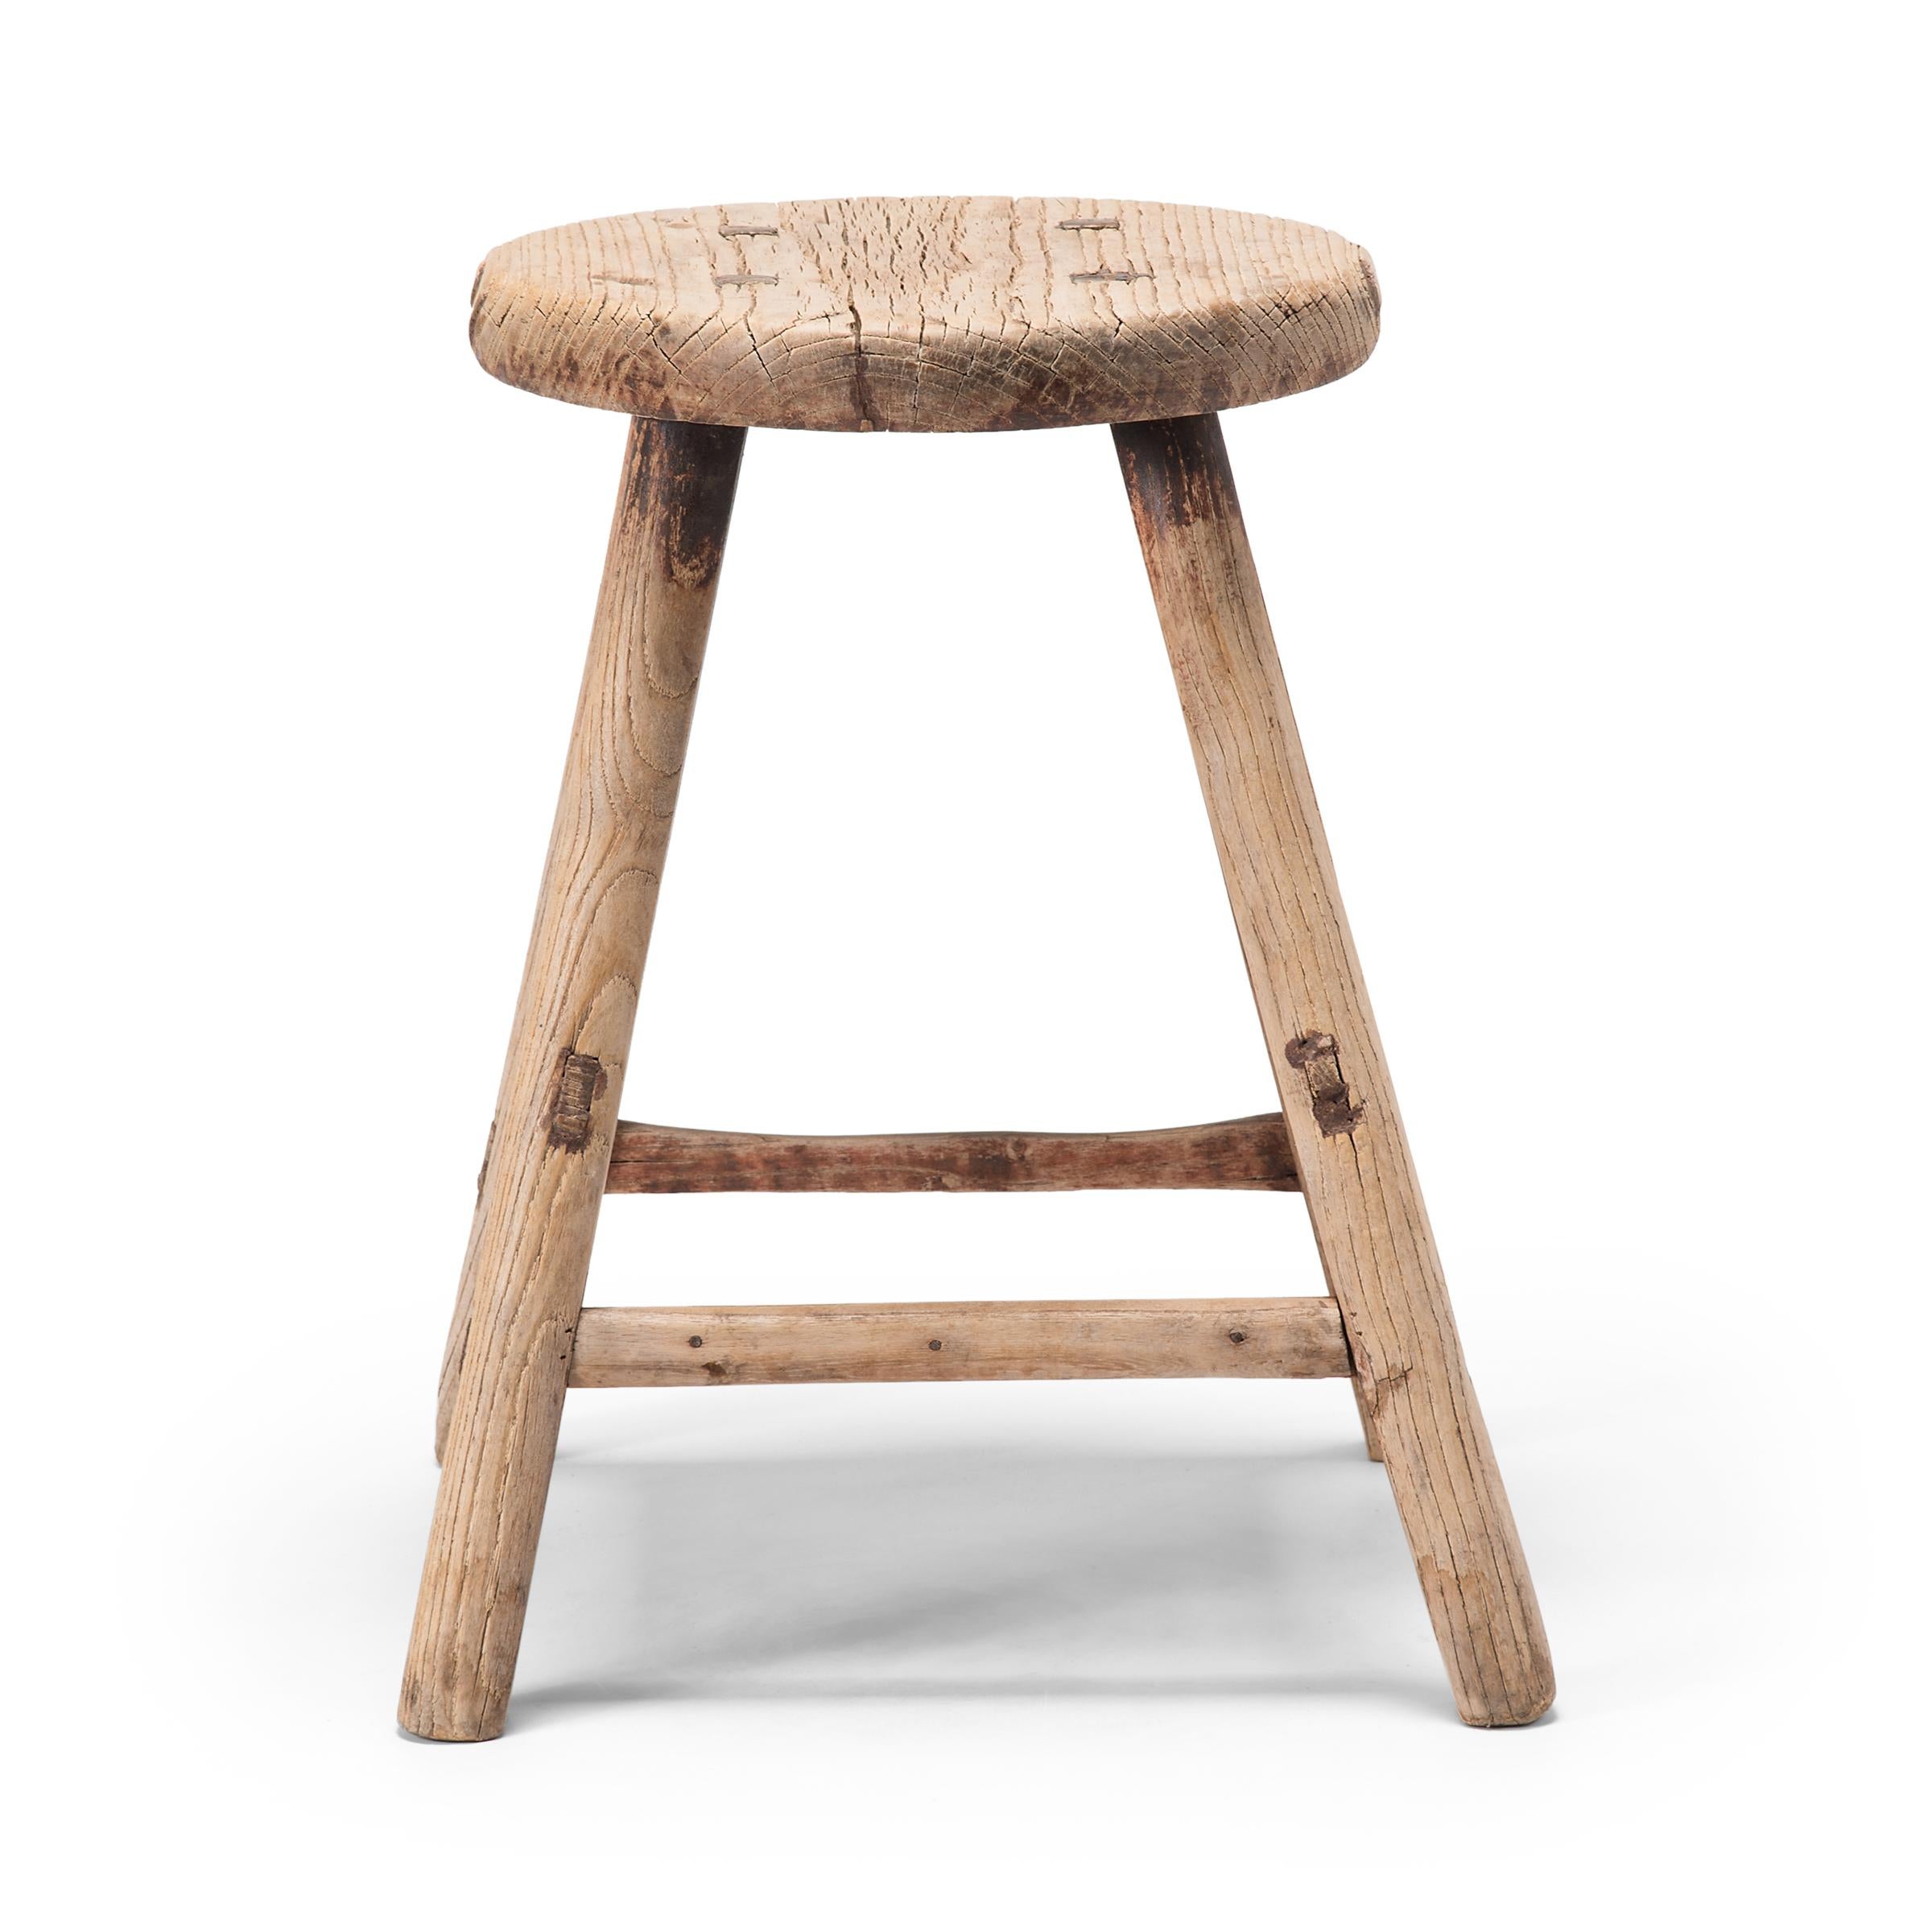 This early 20th century round-top stool from China's Shanxi province is beautiful in its simplicity. The stool's elmwood seat was flat-sawn to reveal grain patterns running parallel to the surface, the deep grooves accentuated by a century of use.